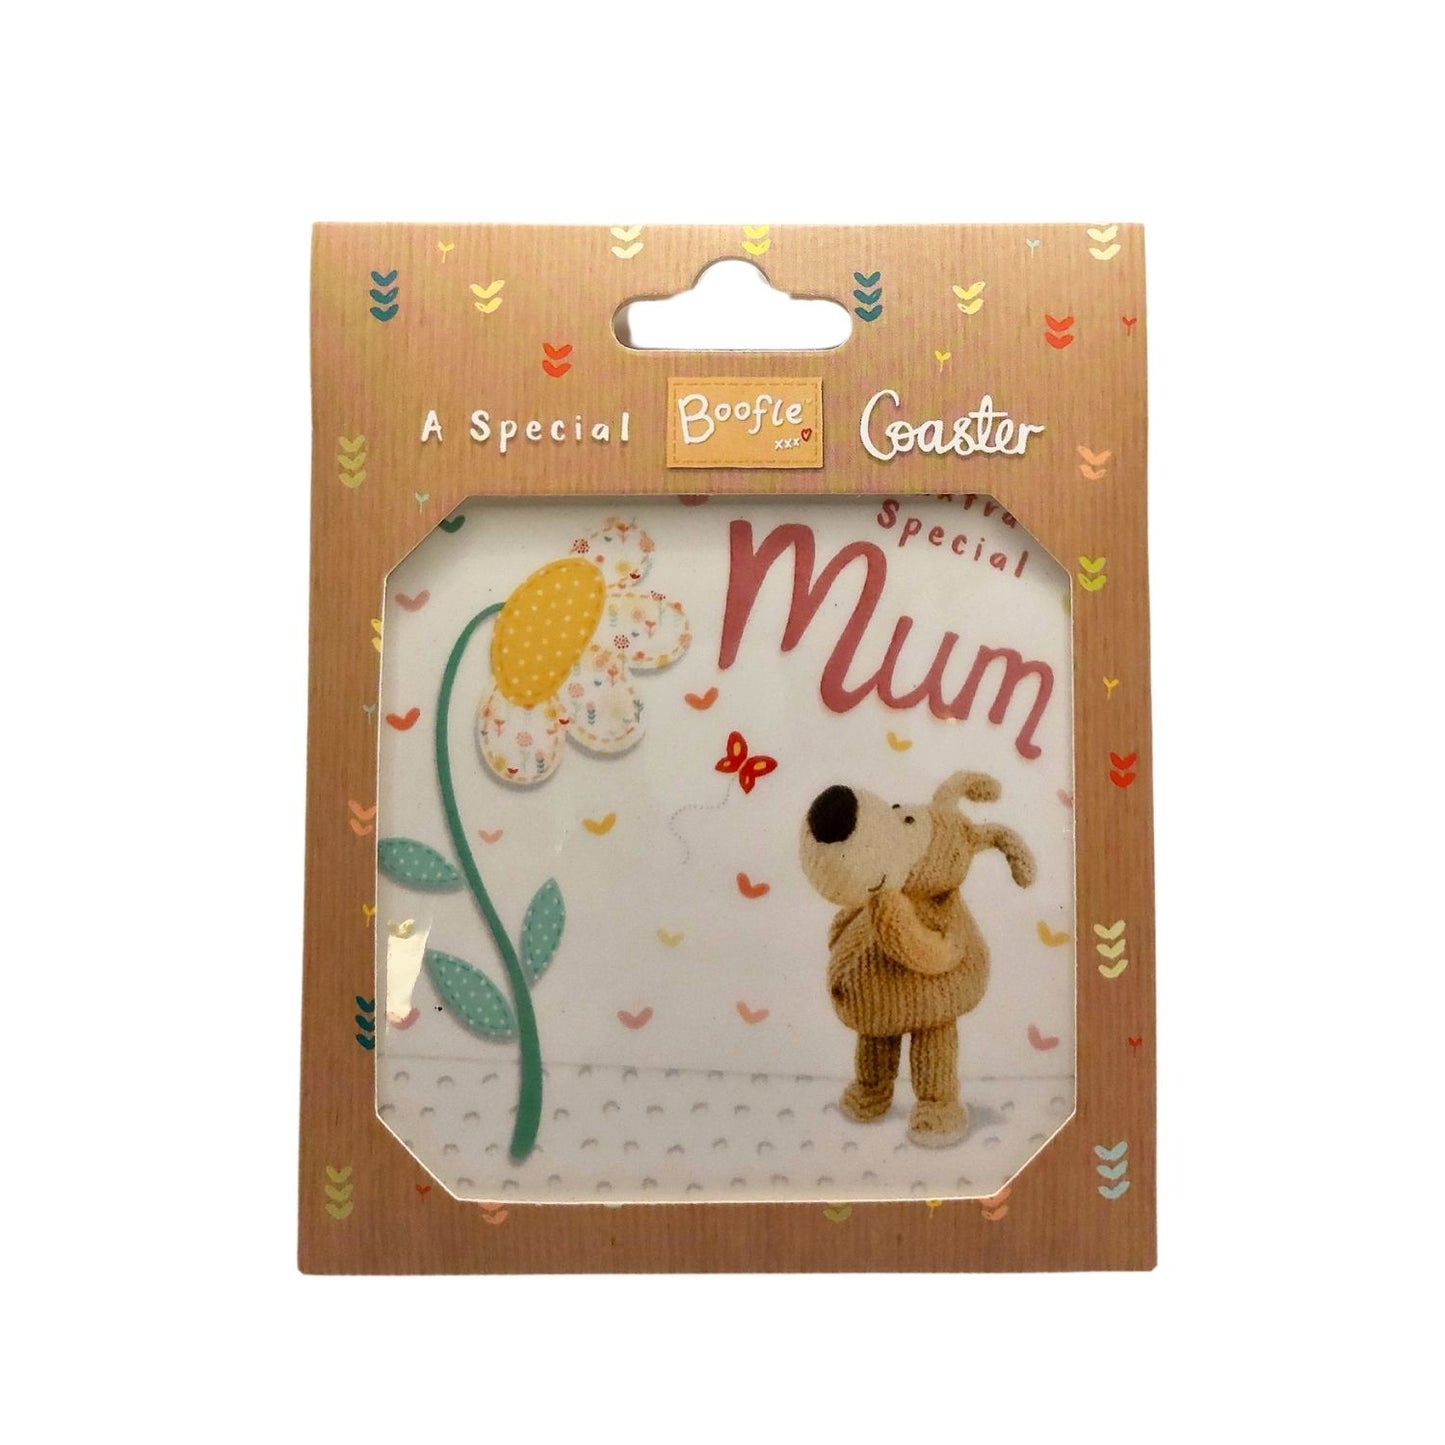 Boofle Special Mum Flutterby, Boofle! Coaster Gift Idea